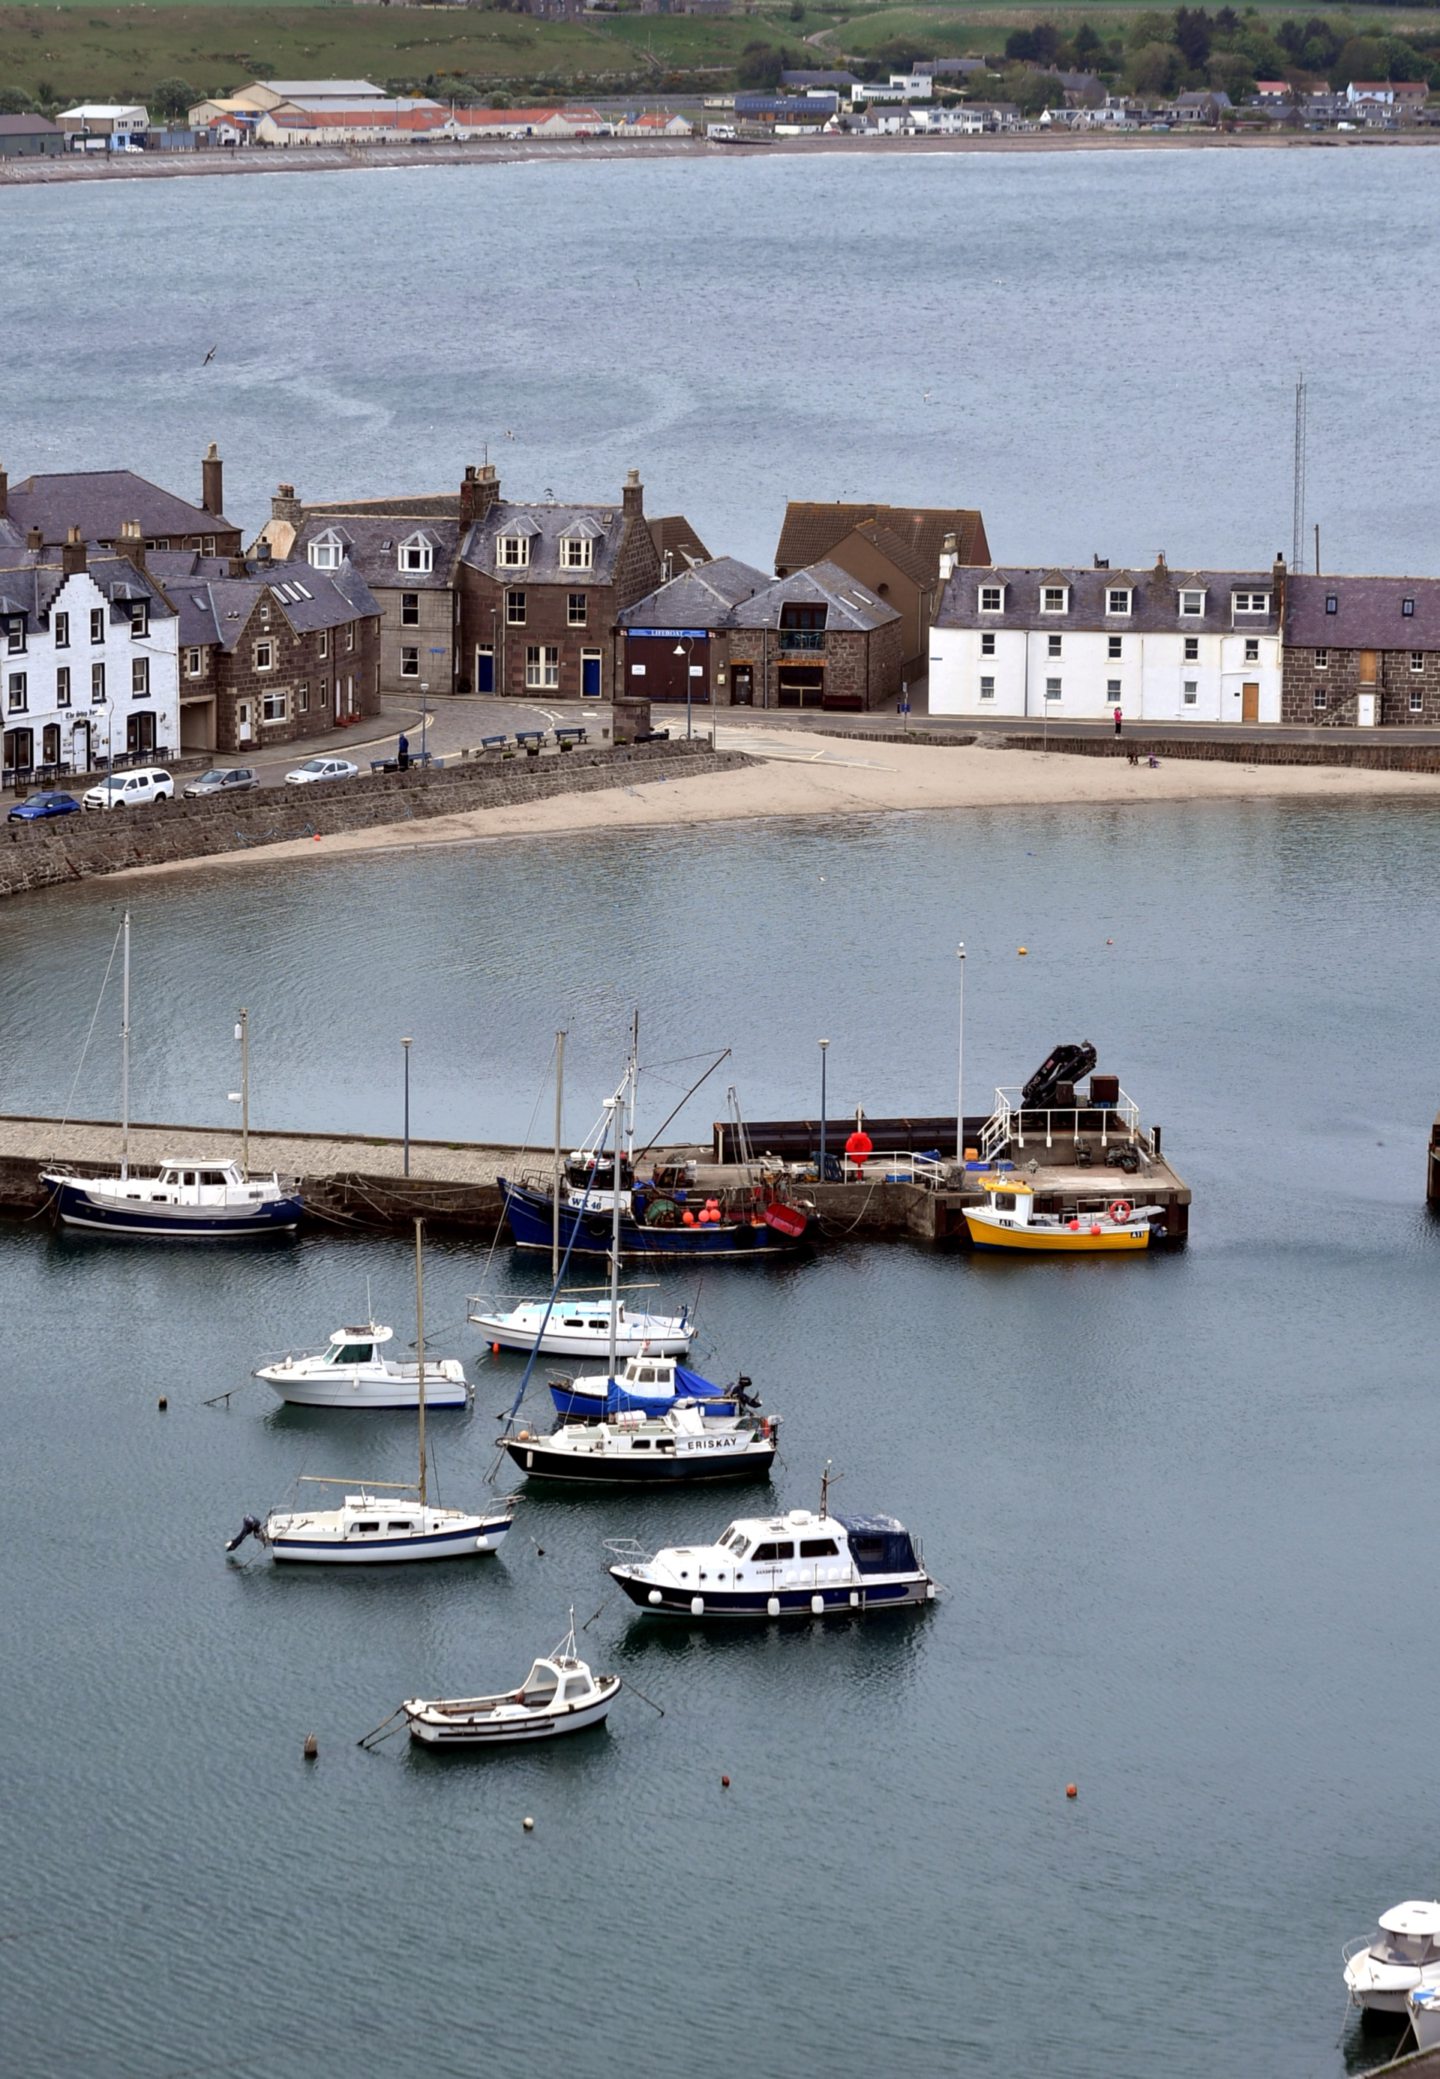 CR000000 STOCK
Boats in Stonehaven harour.
Pic by....Chris Sumner
Taken...............26/5/202